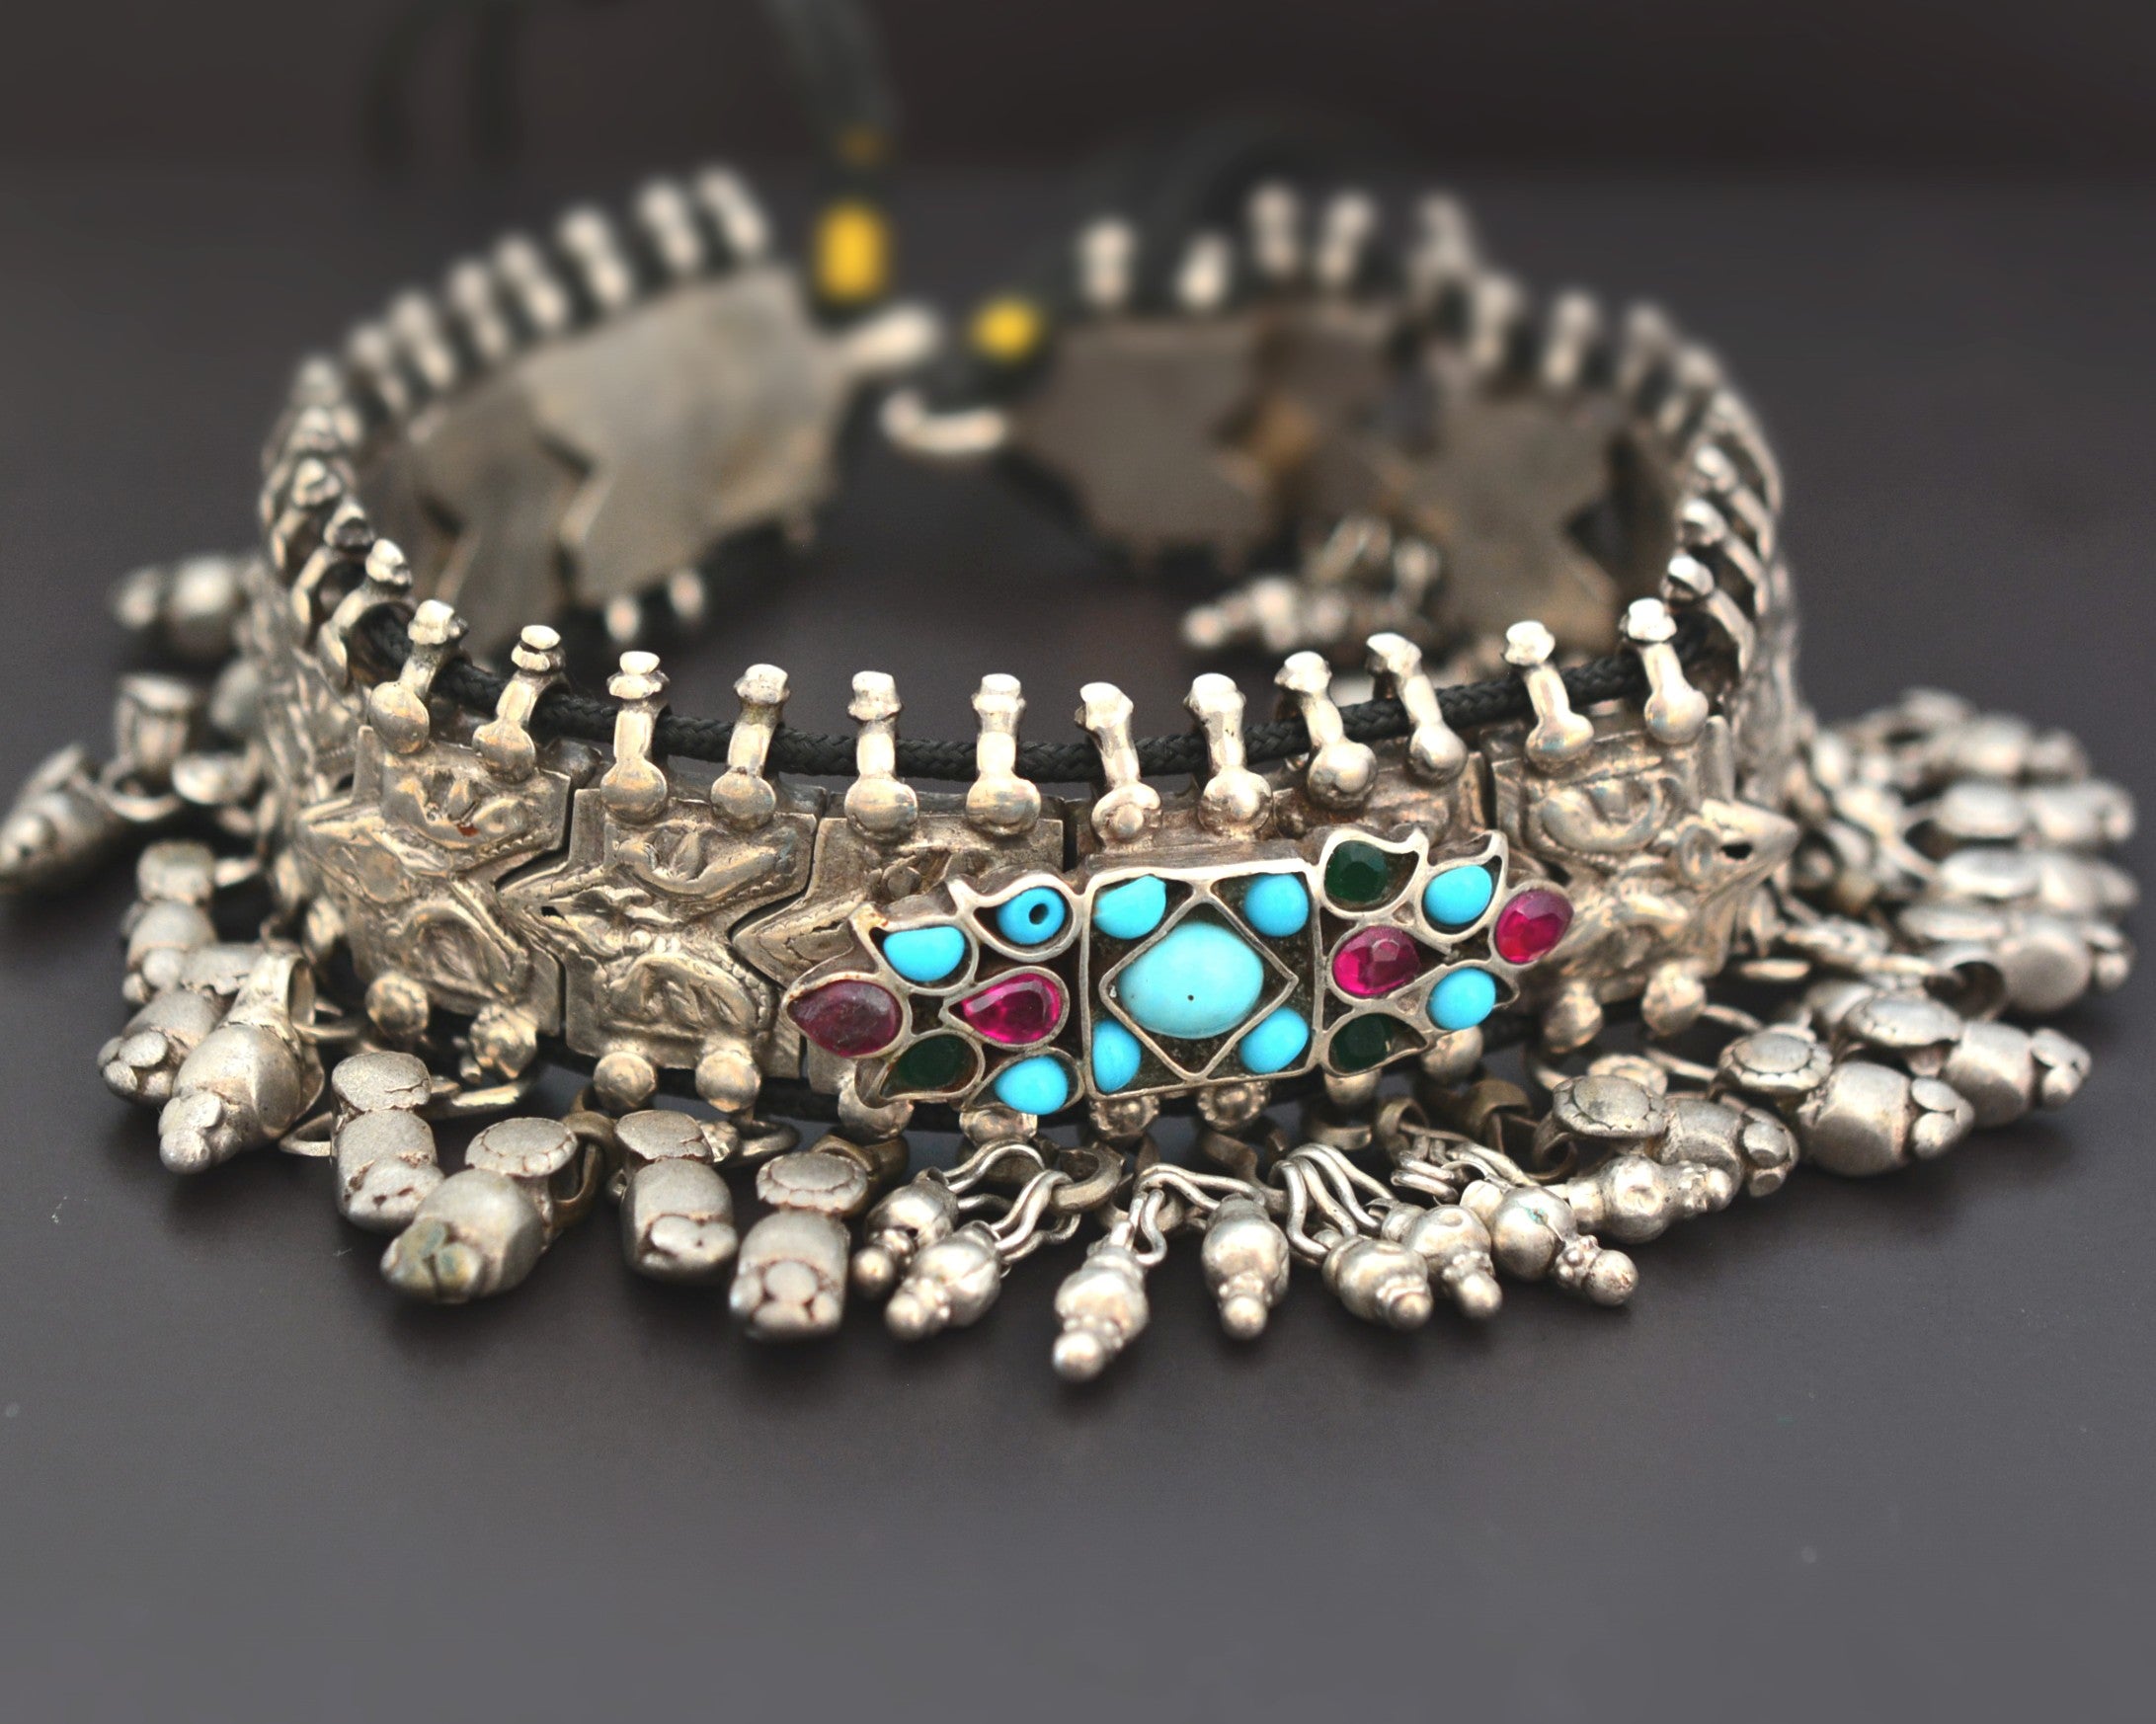 Rajasthani Silver Choker Necklace on Cotton Cord